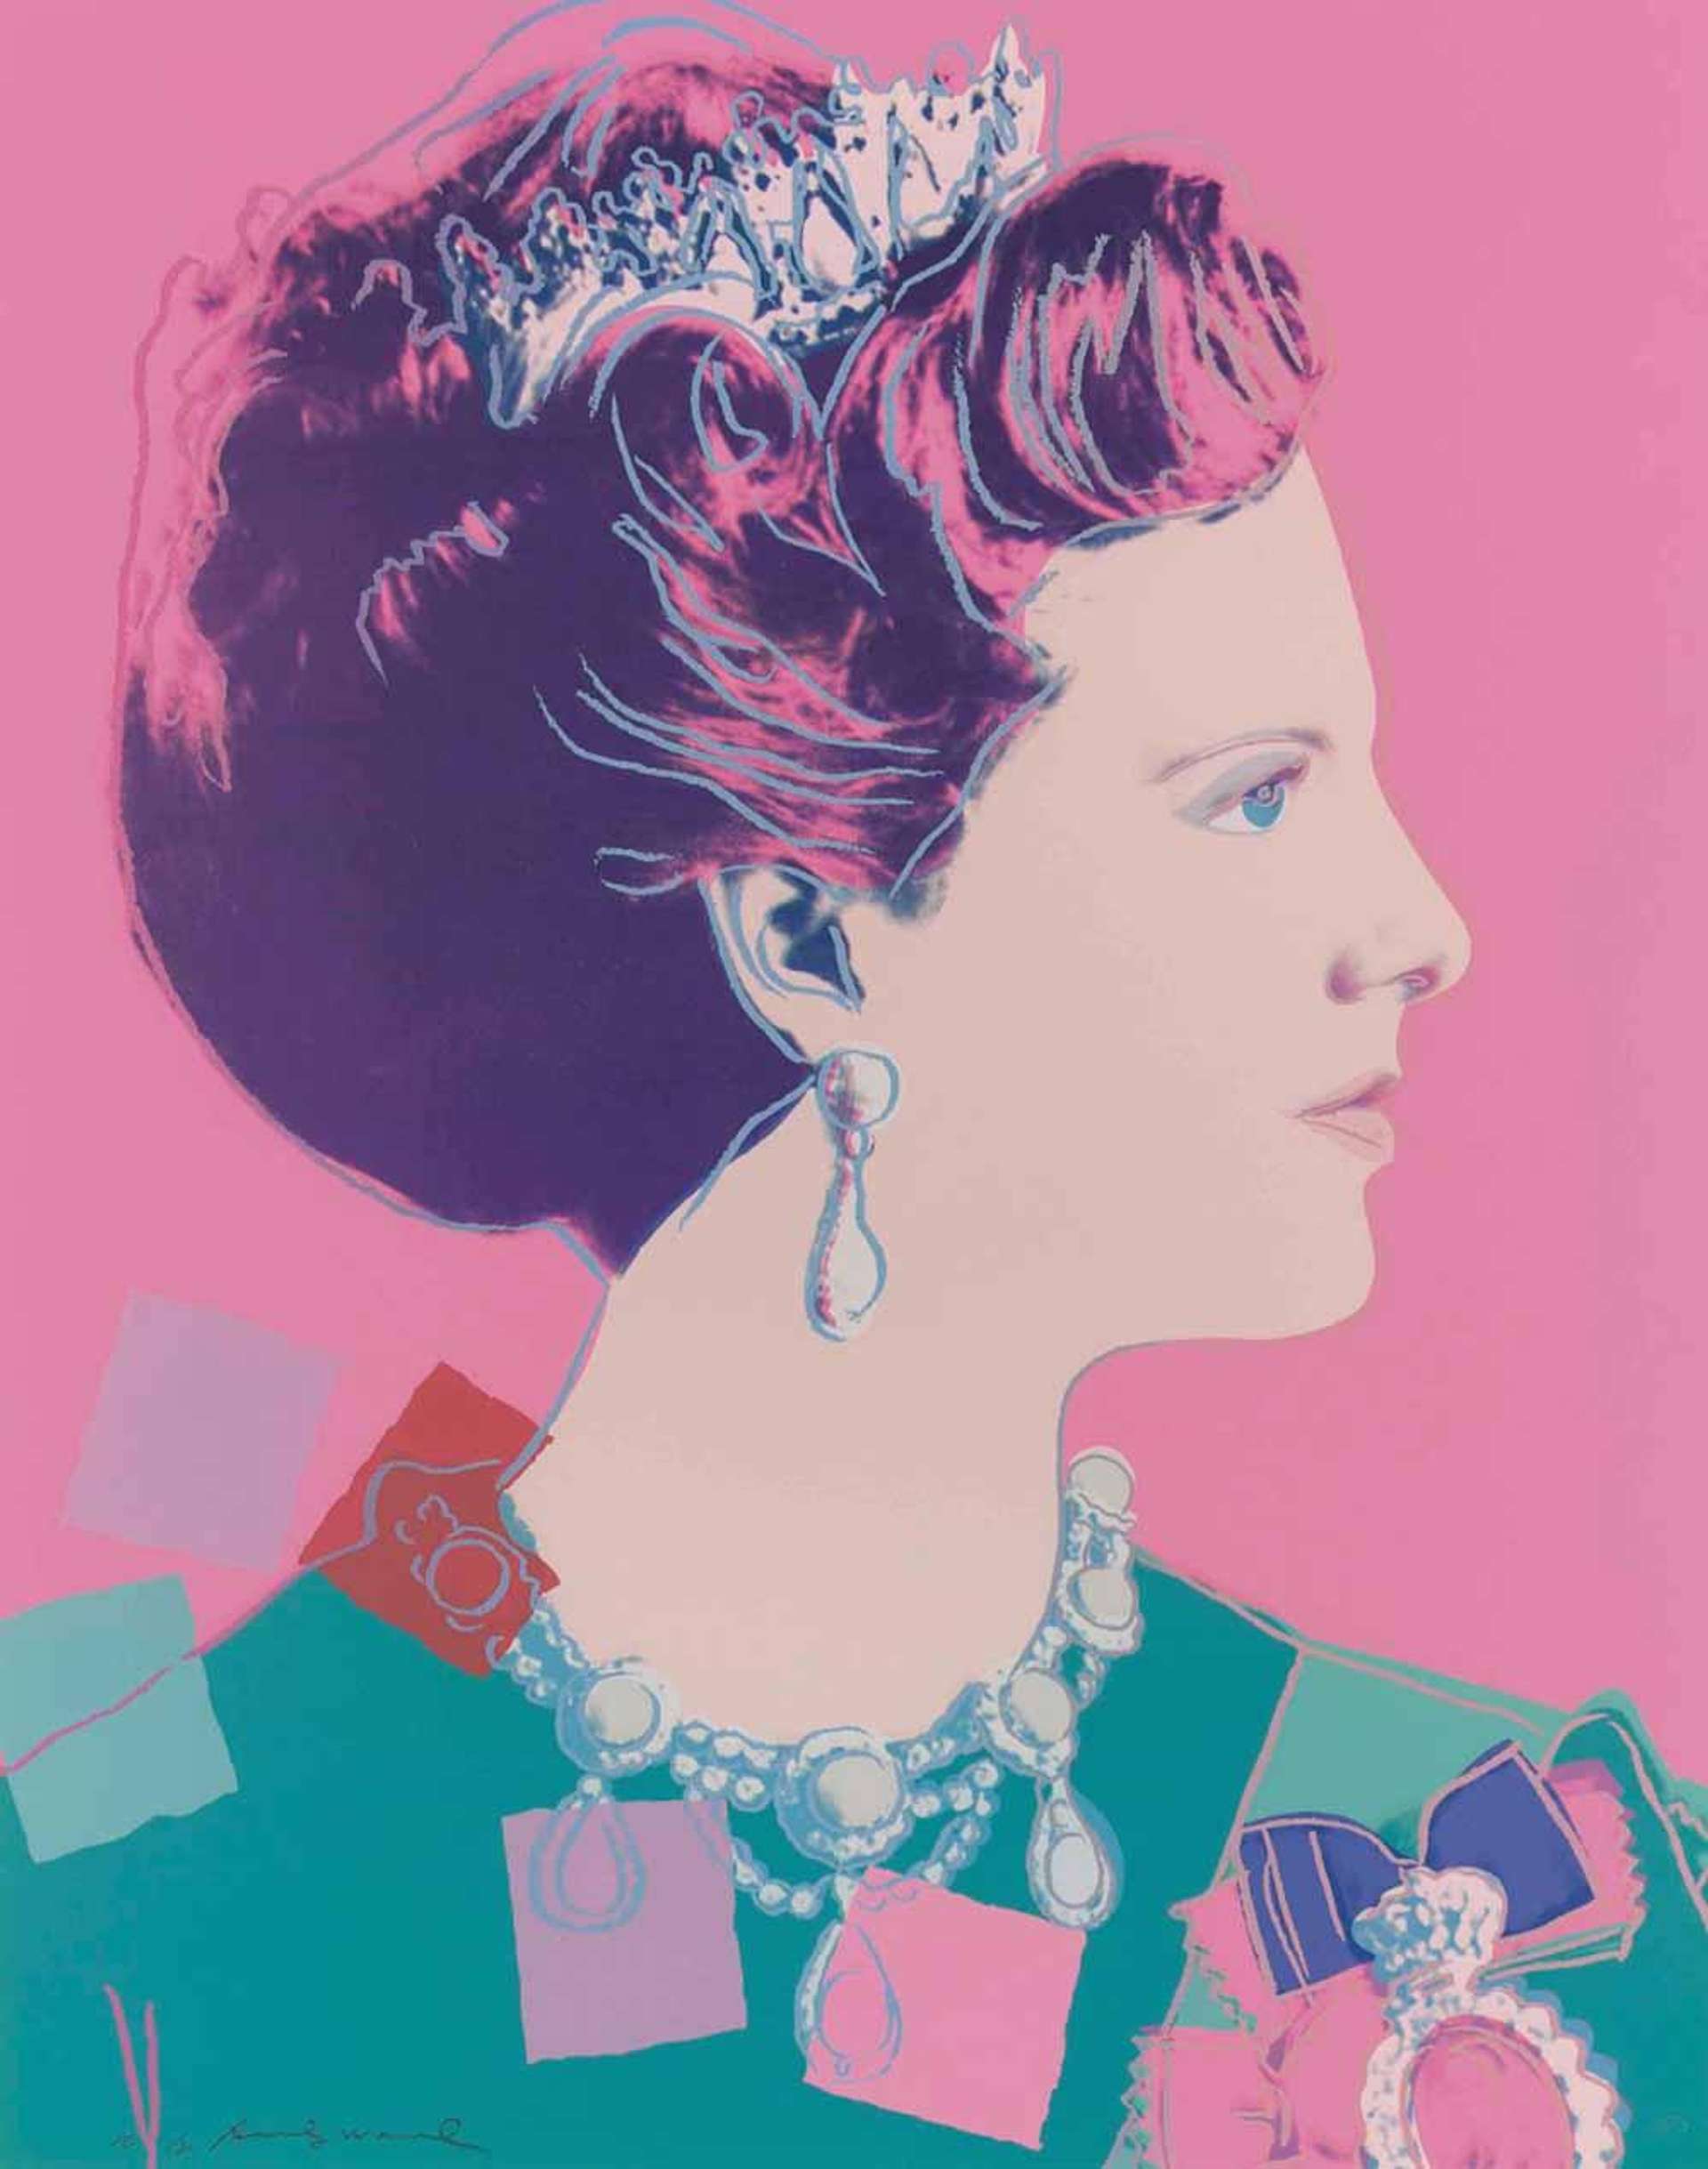 Queen Margrethe Of Denmark Royal Edition (F. & S. II.345A) - Signed Print by Andy Warhol 1985 - MyArtBroker